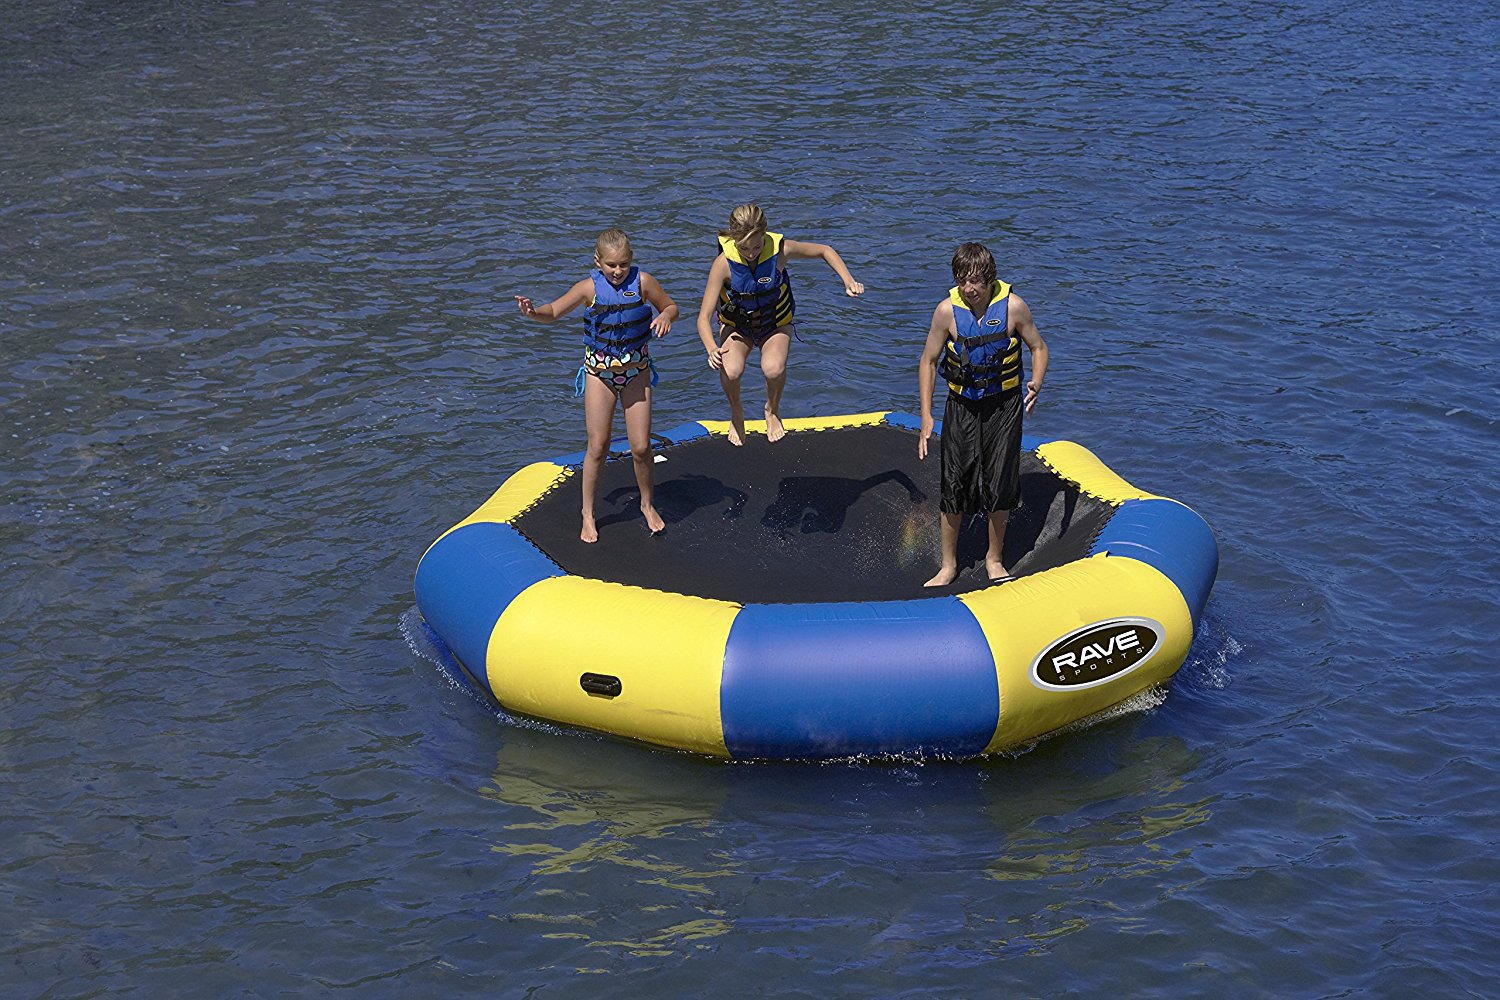 Is there anything you'd rather be doing right now than bouncing on a trampoline in the middle of the lake? Doubt it.</br></br>Follow your dreams <a href=https://amzn.to/2LwBjLo "nofollow" target="_blank">here.</a>